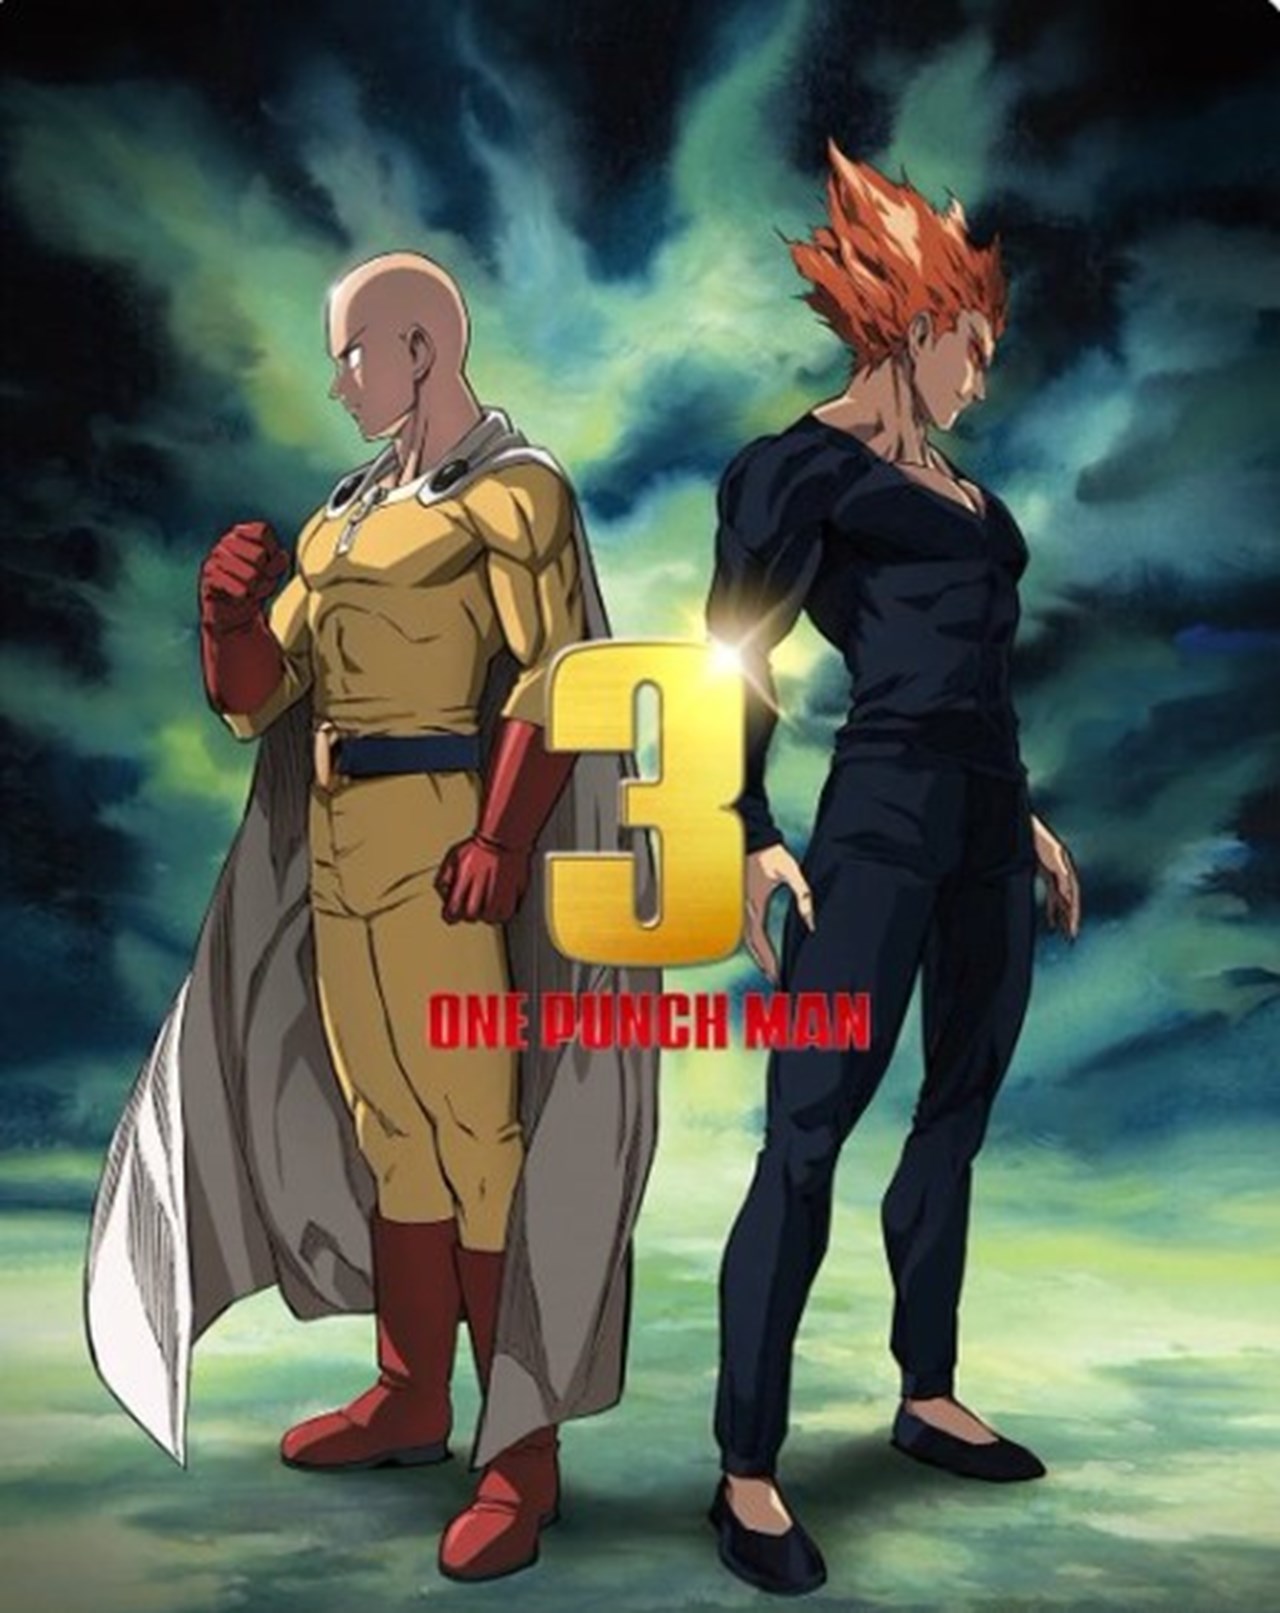 One Punch Man Season 3 release date: Confirmed! MAPPA to animate